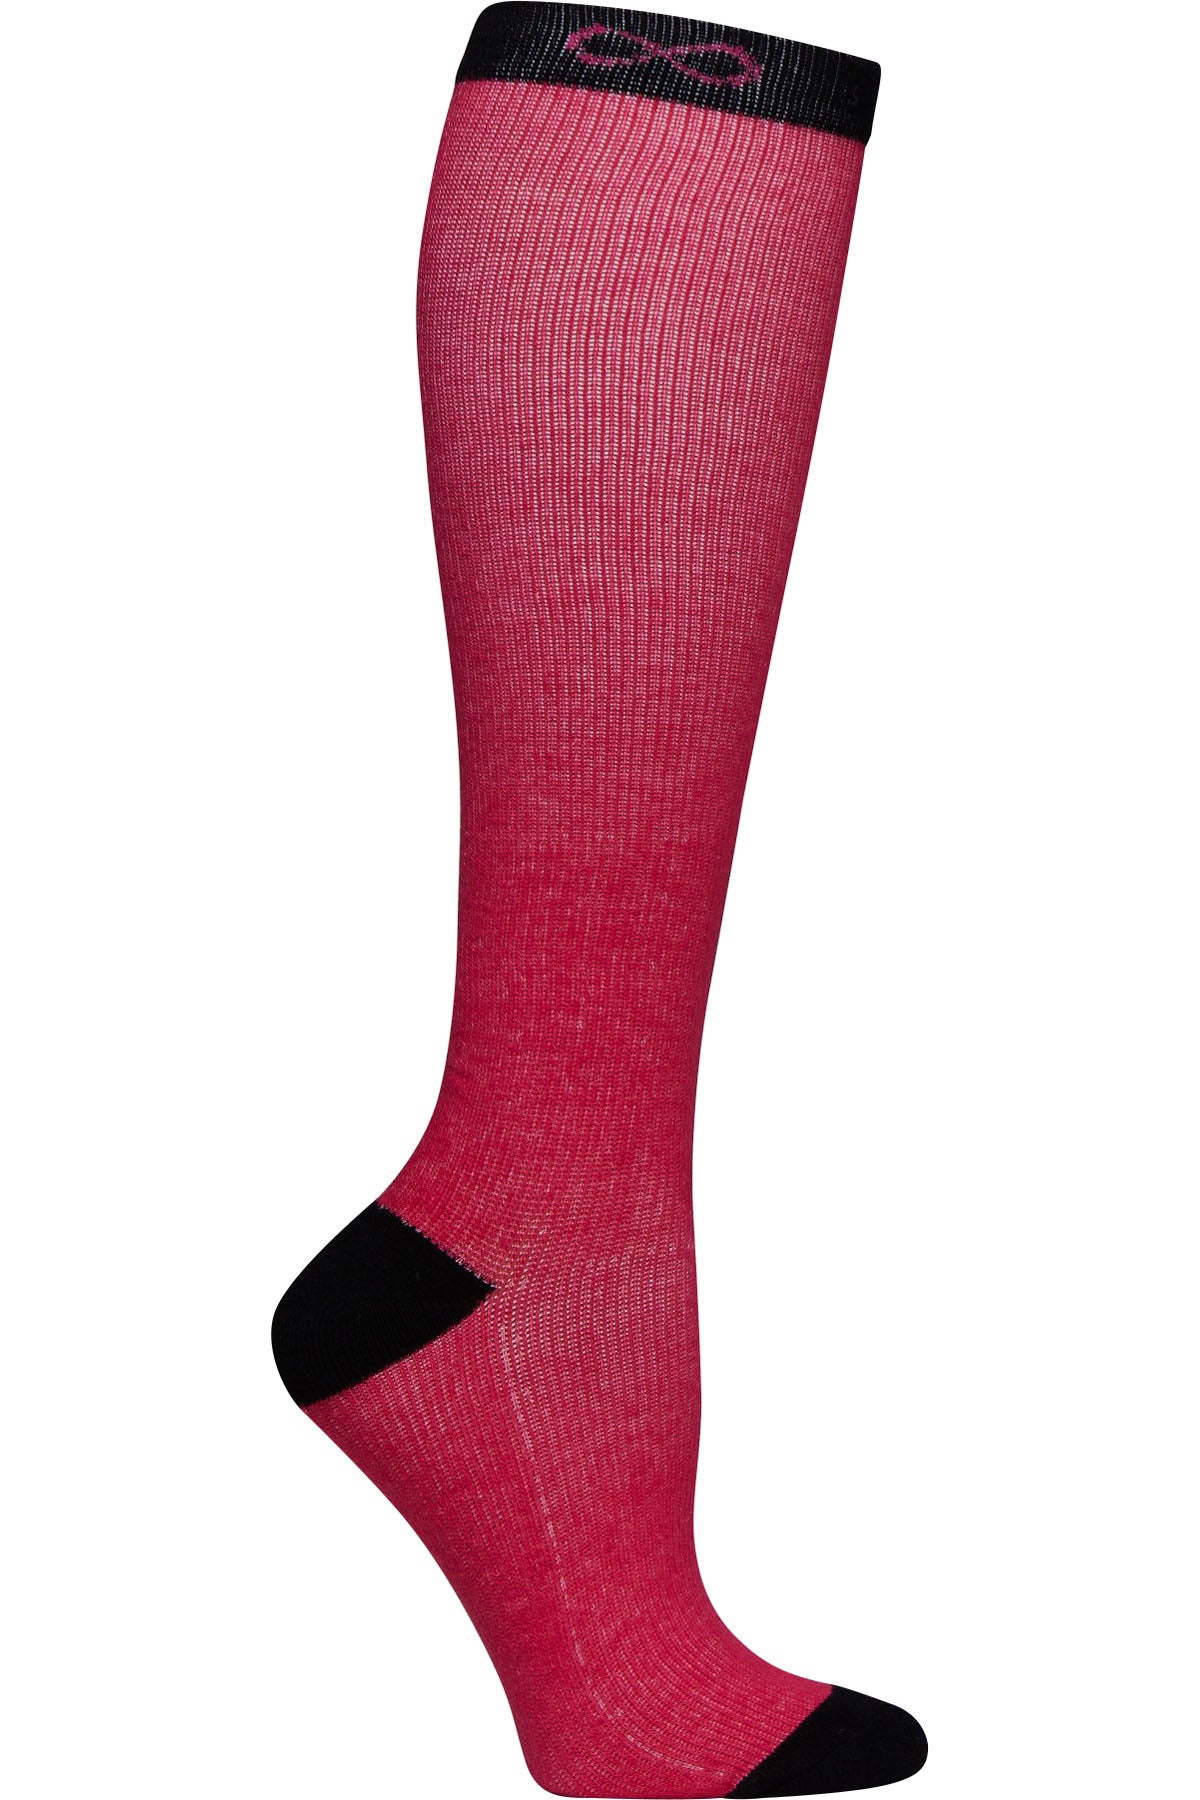 Cherokee Moderate Compression Socks Infinity Kickstart 15-20 mmHg Punch at Parker's Clothing and Shoes.